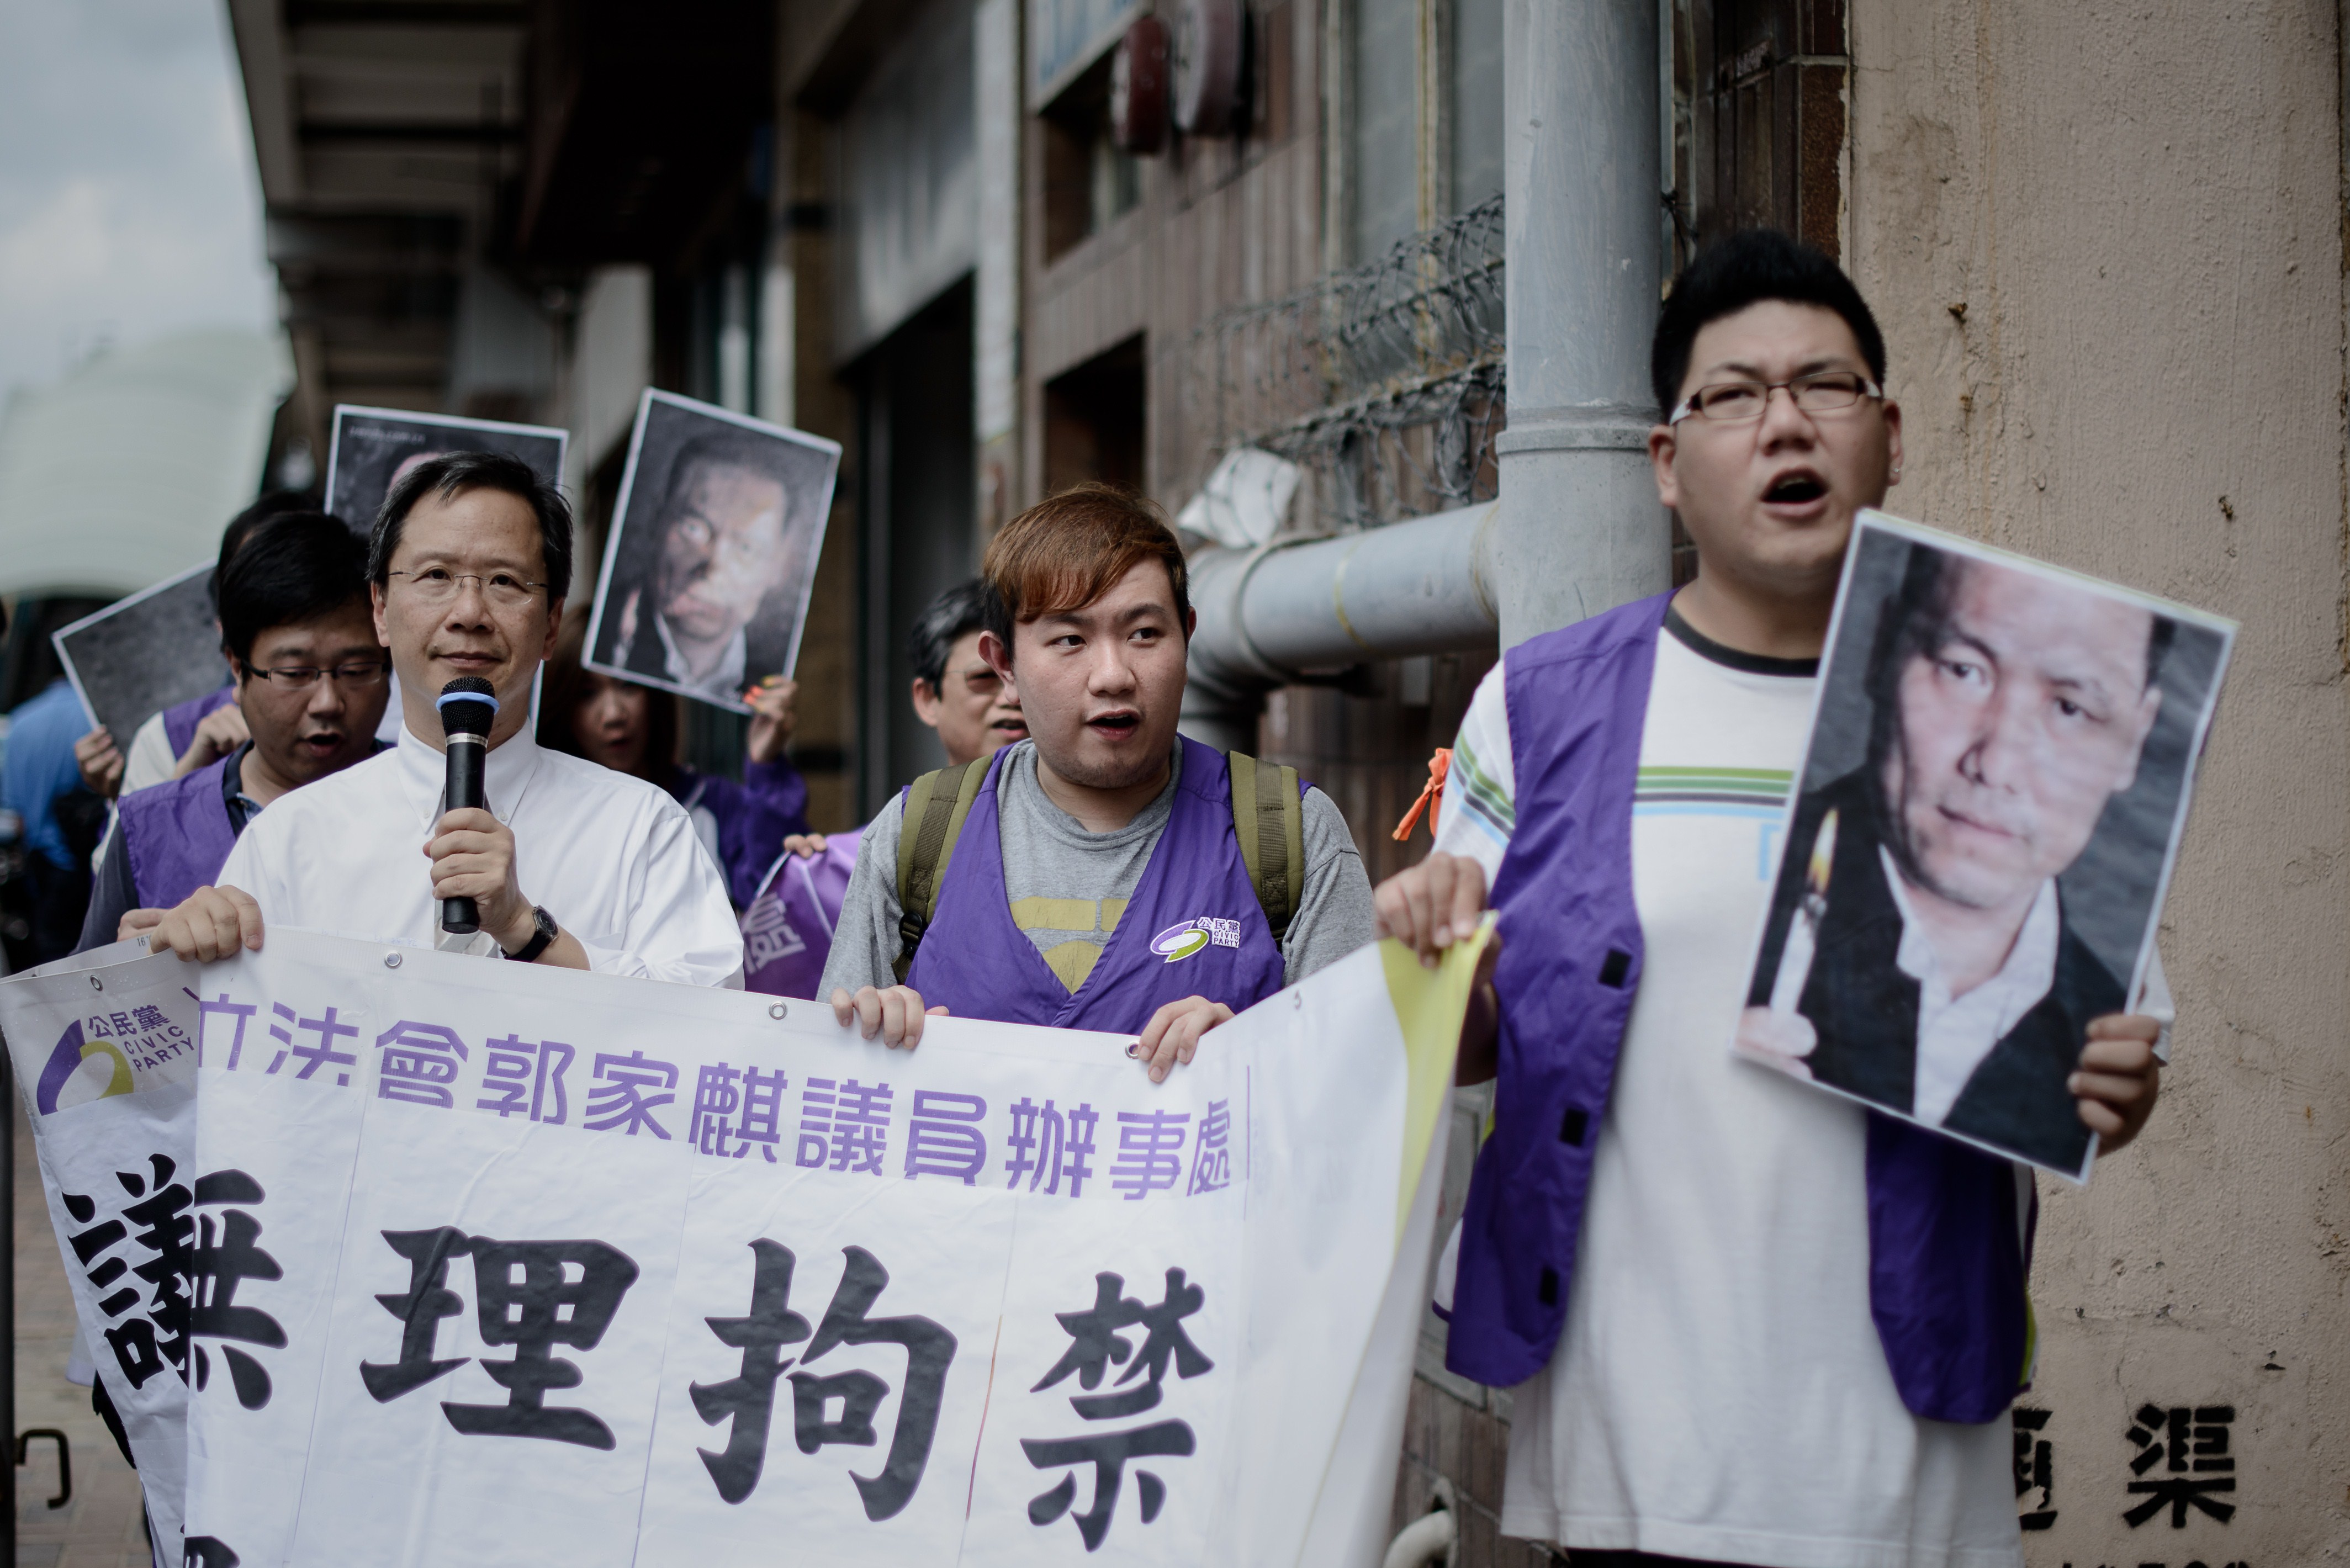 Protesters holding pictures of detained Chinese human-rights lawyer Pu Zhiqiang march to the Chinese Liaison Office in Hong Kong on May 14, 2014, asking for his release (Philippe Lopez—AFP/Getty Images)